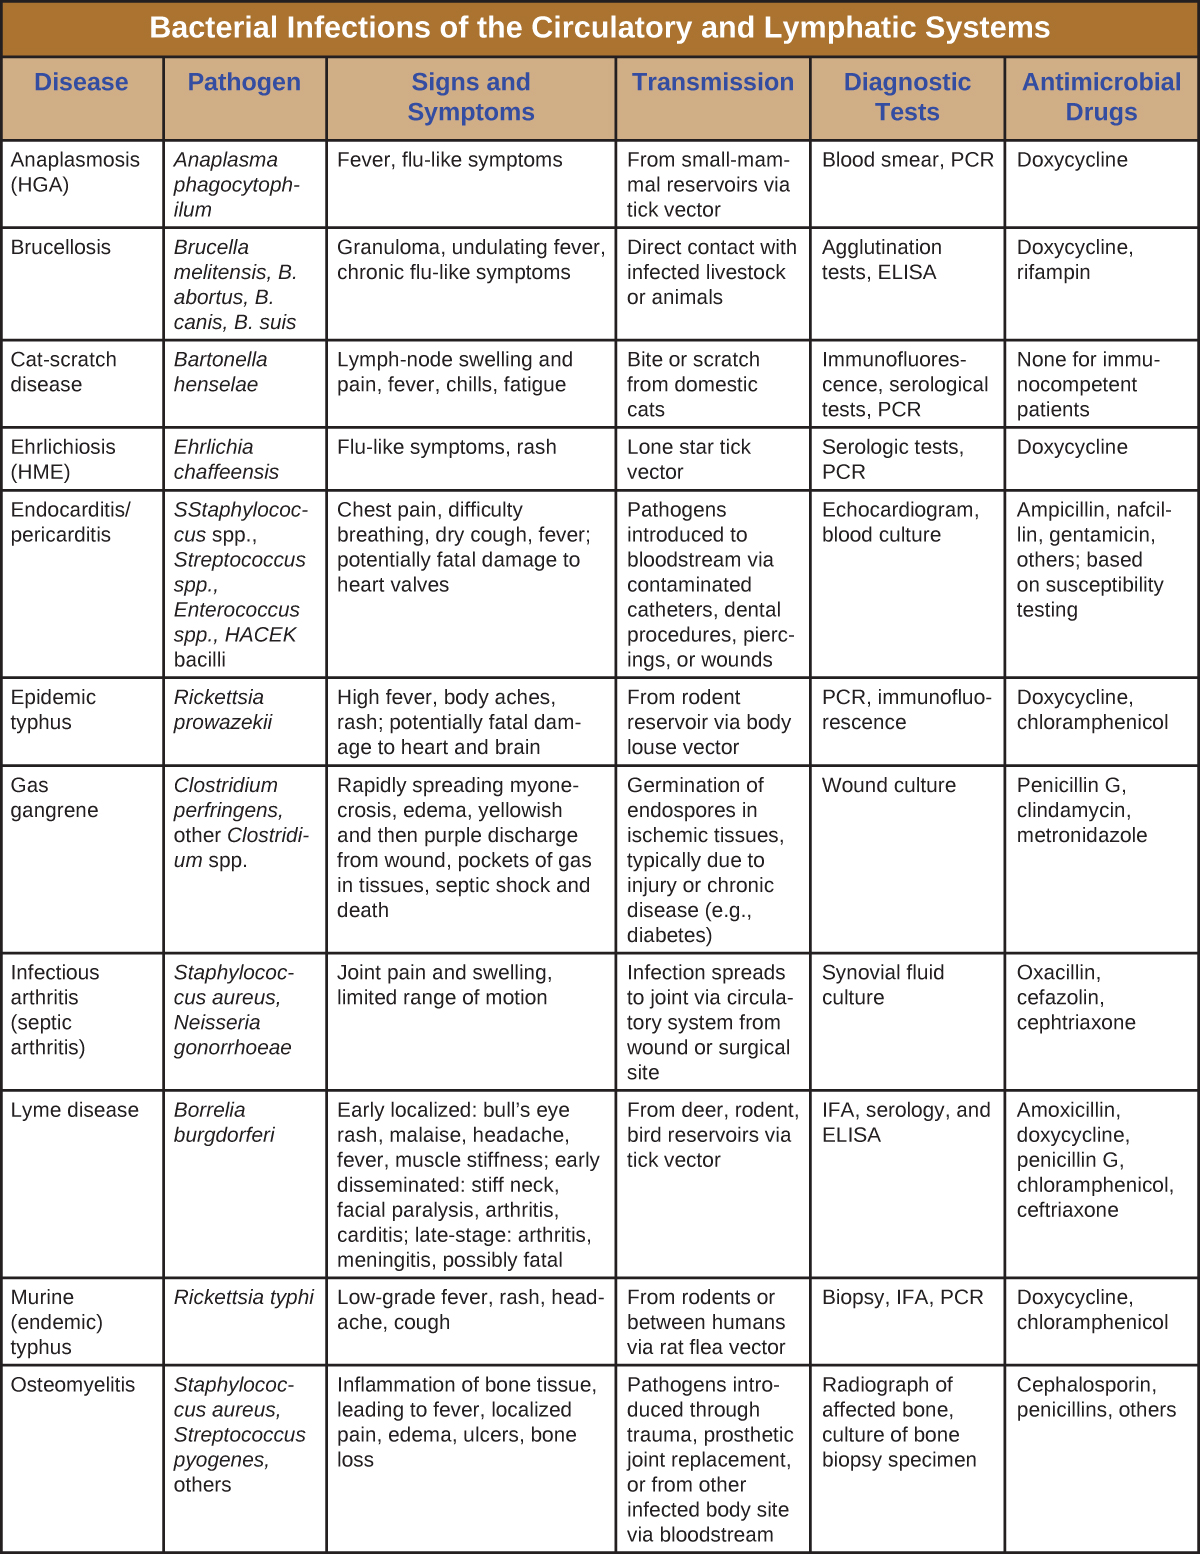 Table summarizing bacterial infections of the circulatory and lymphatic systems